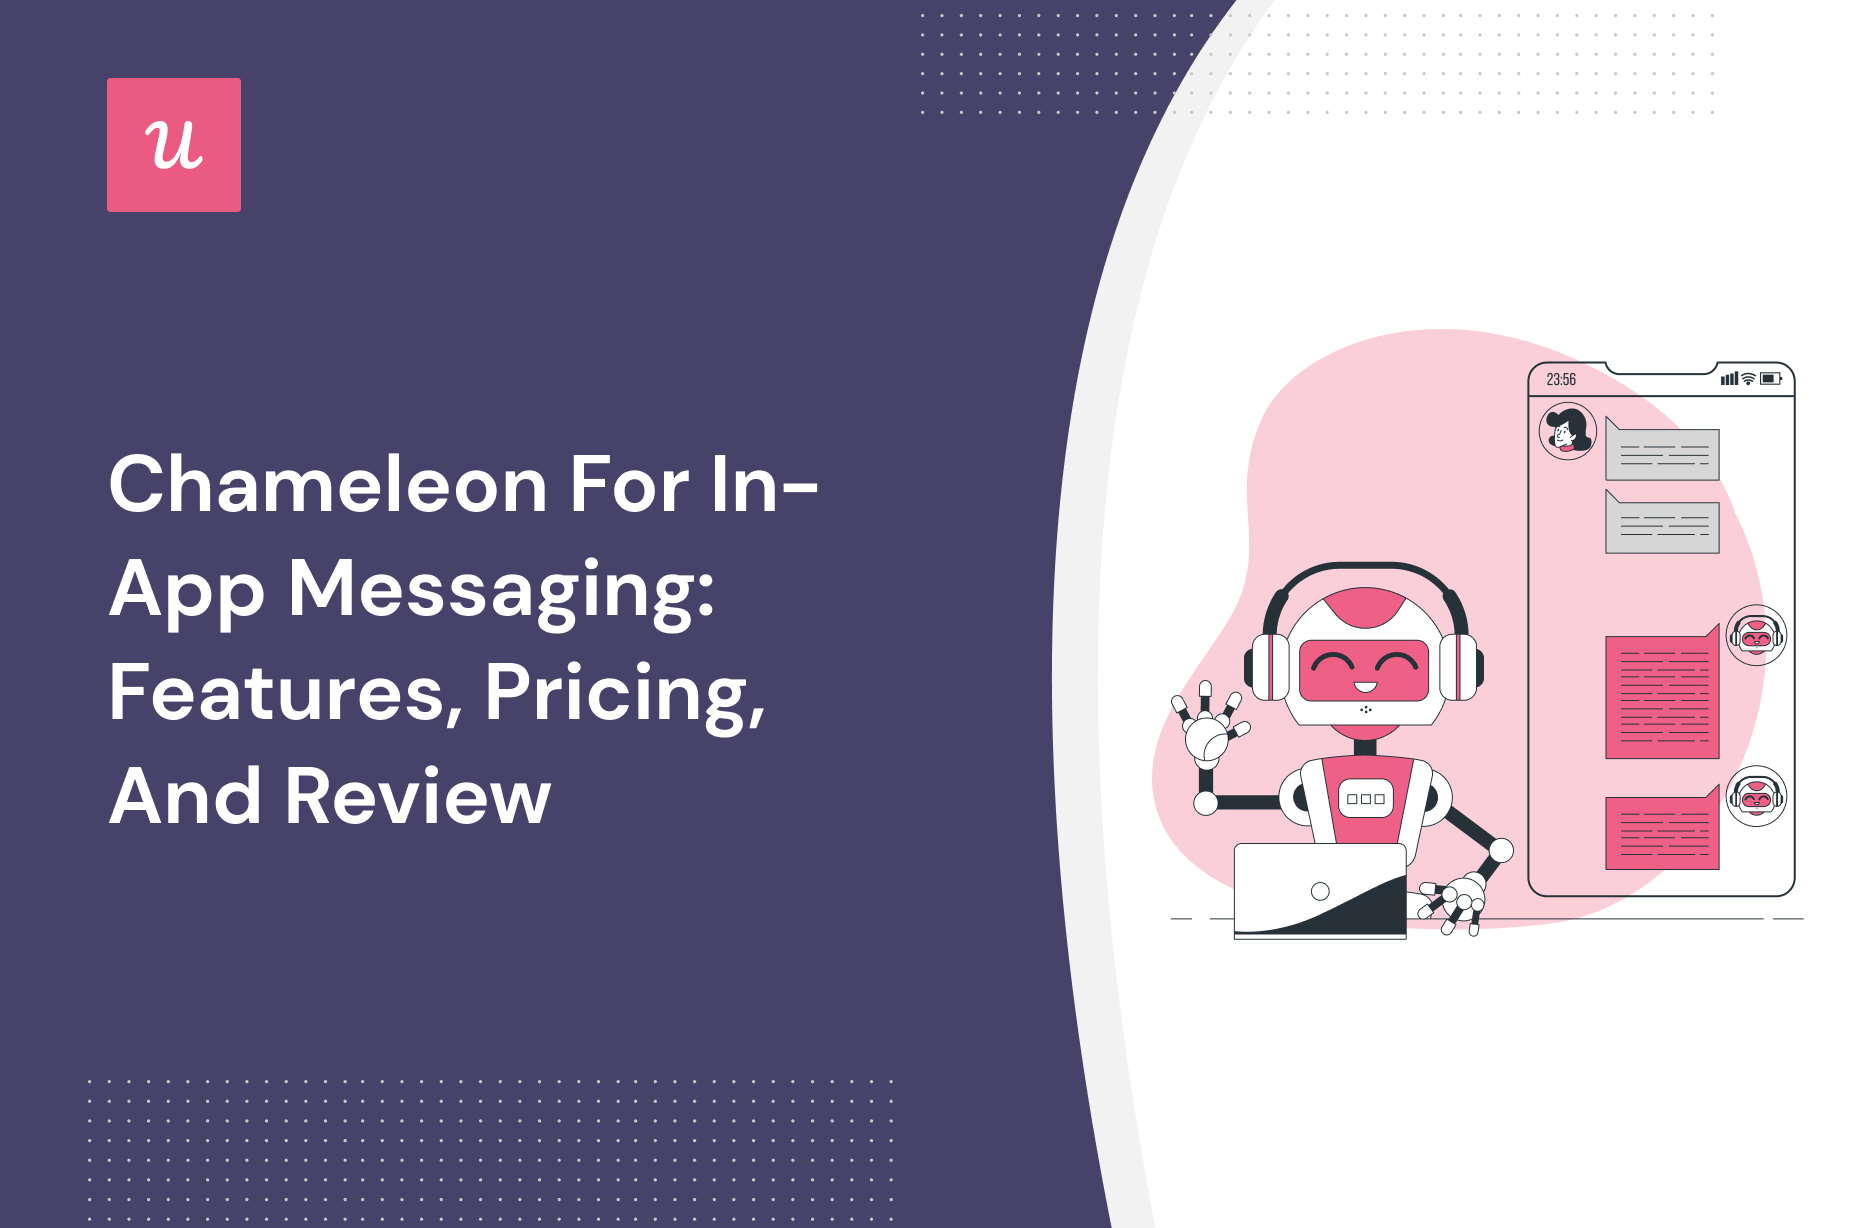 Chameleon for In-app messaging: Features, Pricing, and Review